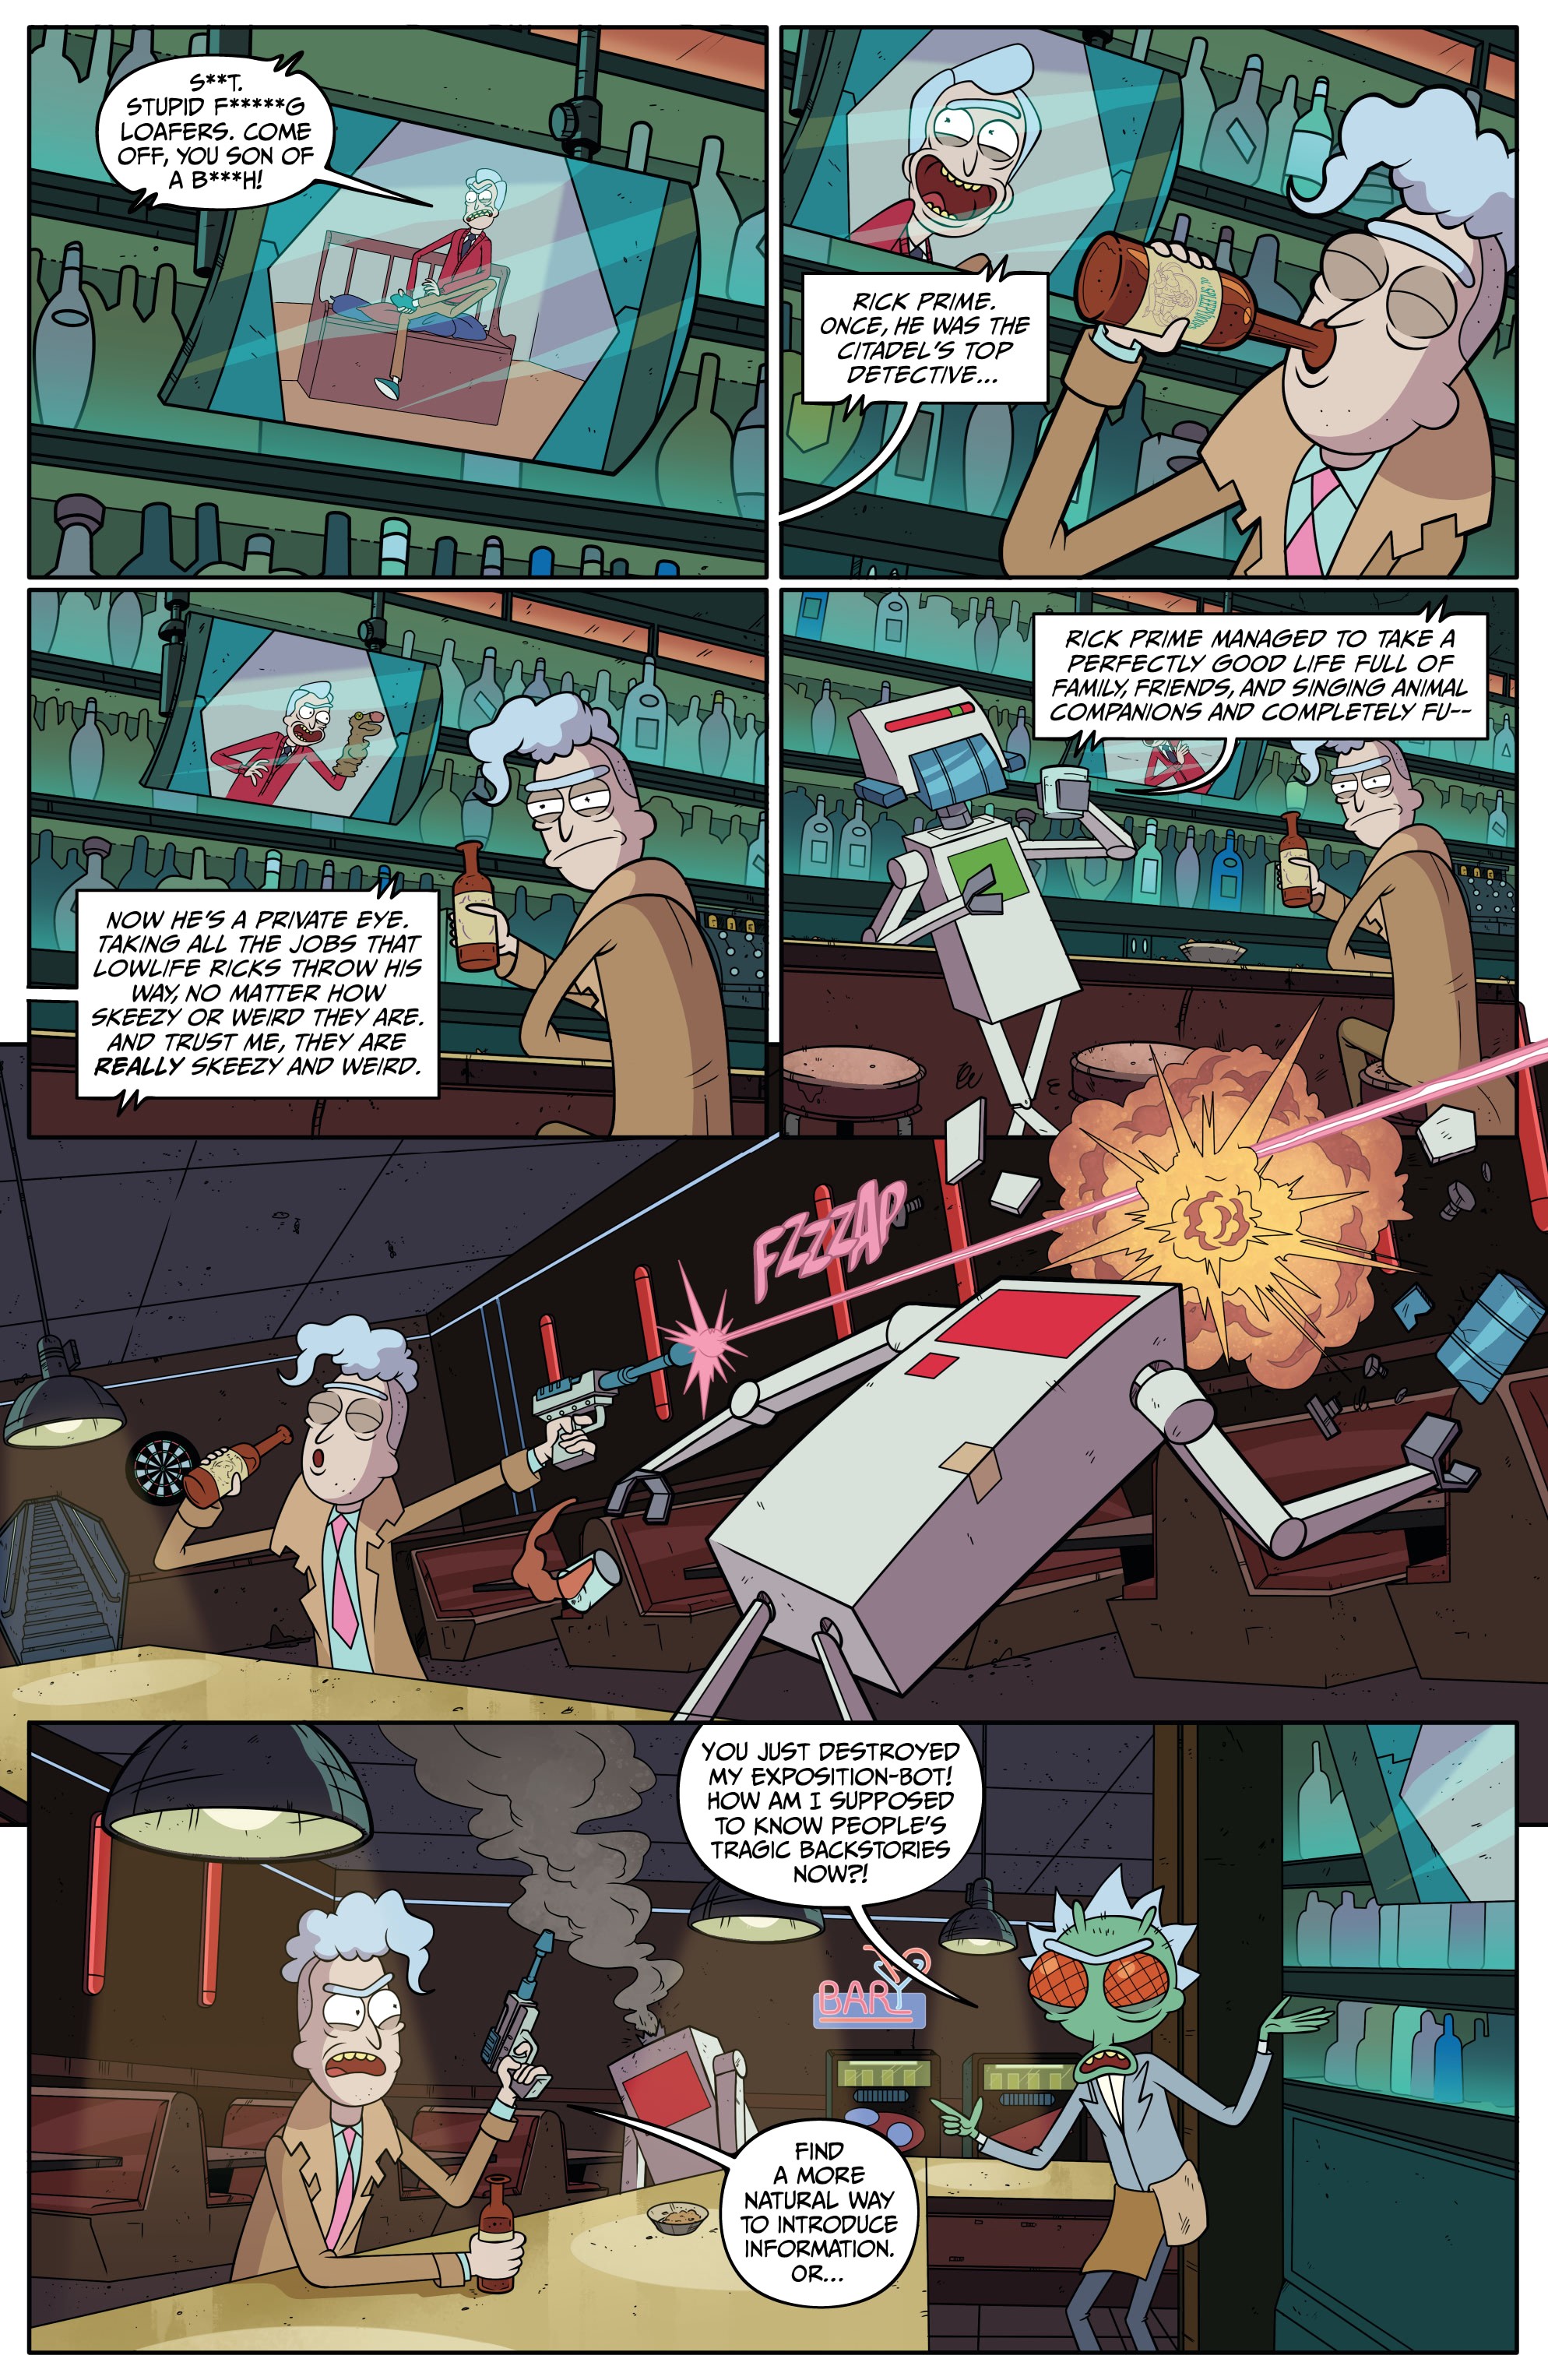 Rick and Morty Presents: The Council of Ricks (2020): Chapter 1 - Page 4